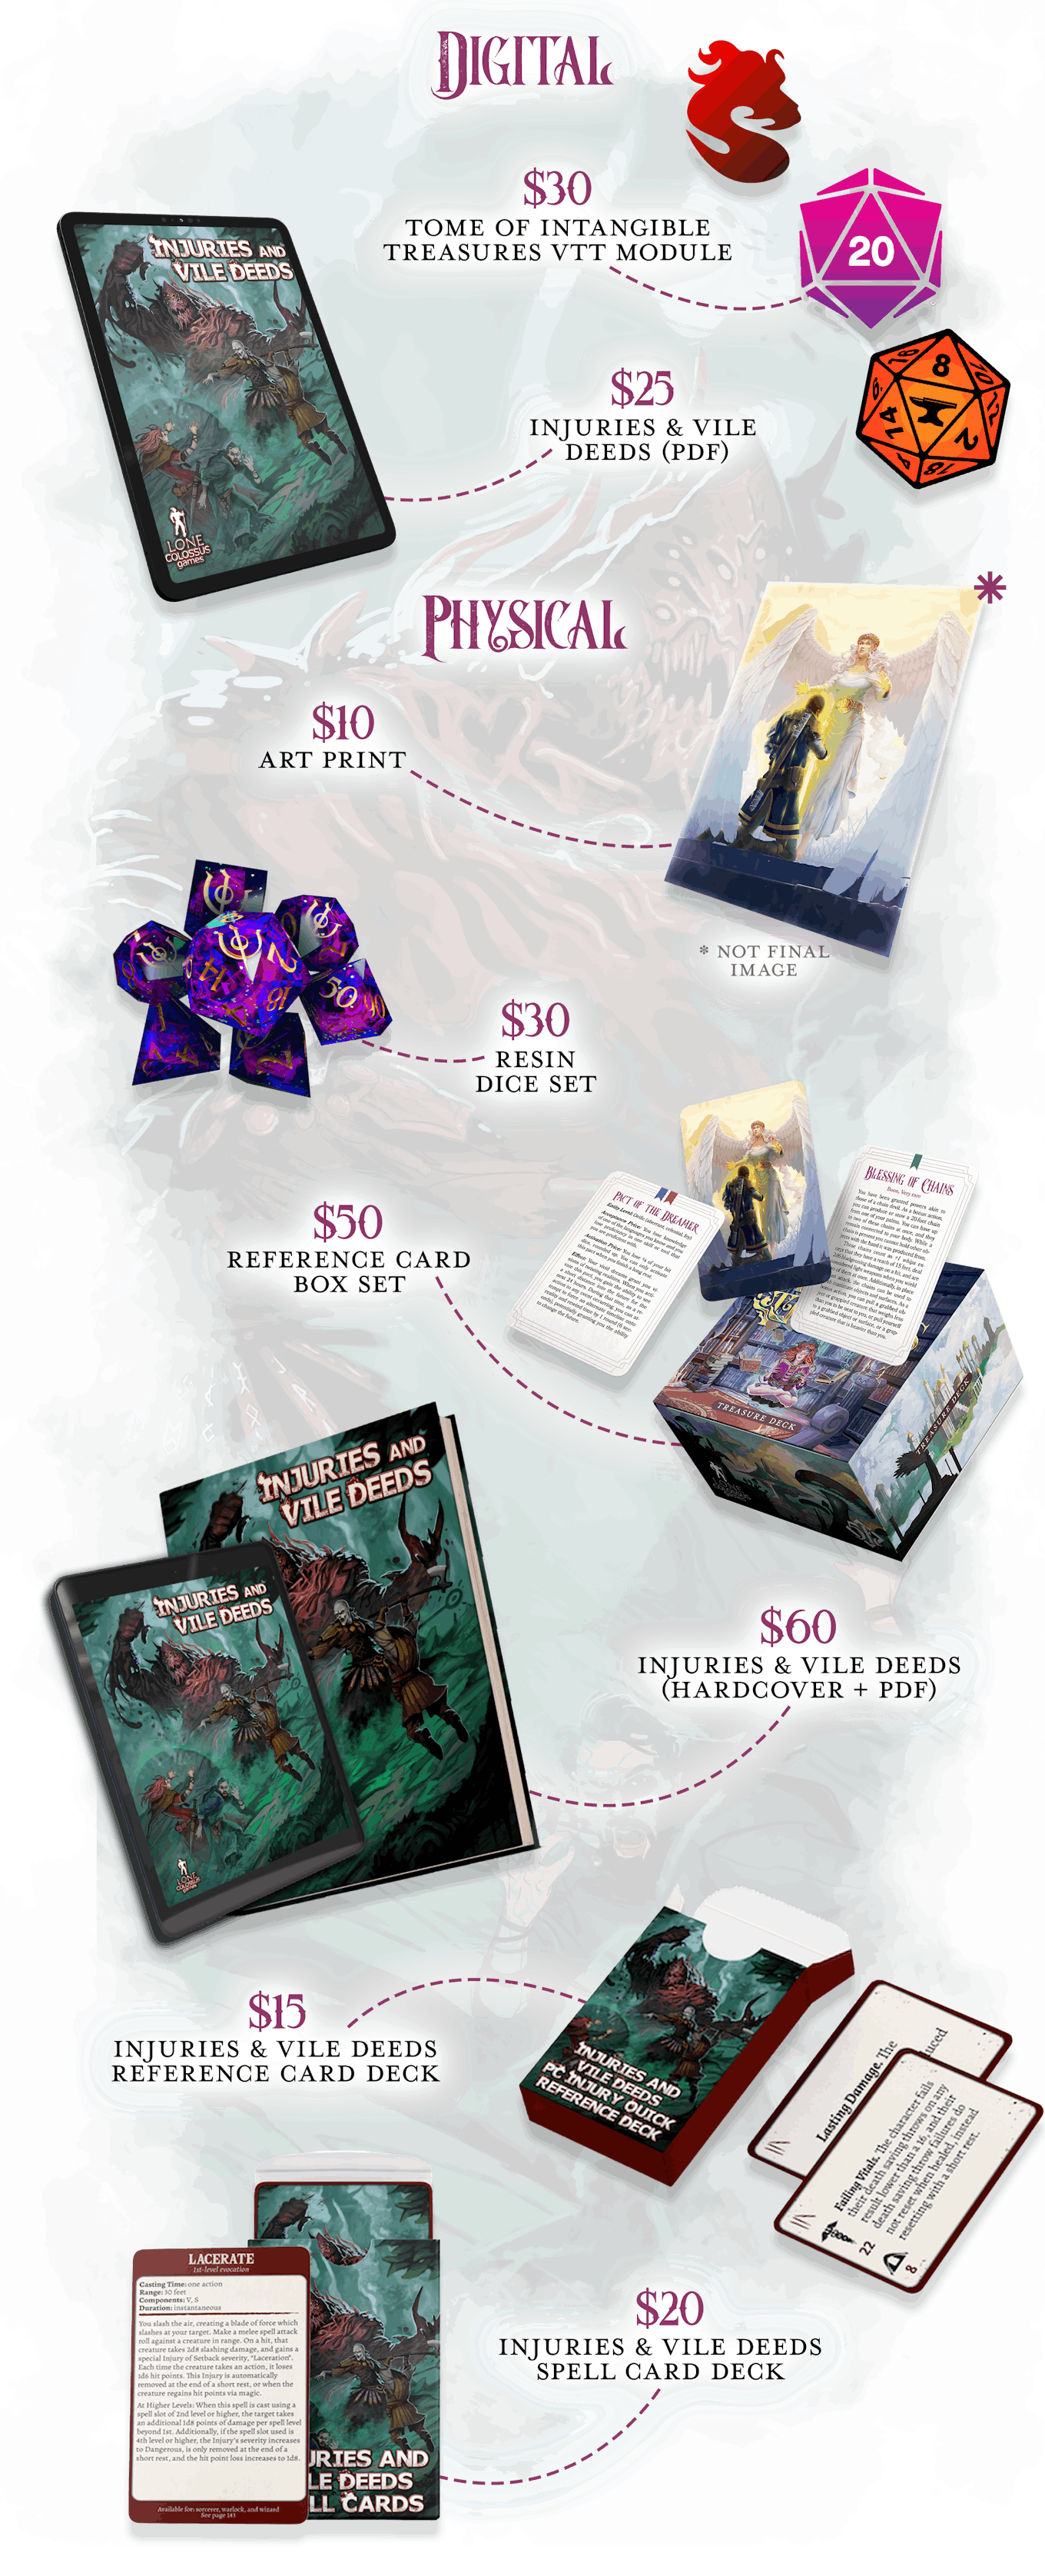  DIGITAL. $30 - Shard, Roll20, or Foundry VTT copy of Tome of Intangible Treasures. $25 - PDF copy of Injuries & Vile Deeds. PHYSICAL. Note: All physical rewards will ship at the same time to save you a second shipping cost. $10 - Tome of Intangible Treasures Art Print. $30 - Mysteries of Magic Sharp-Edged Resin Dice set.  $50 - Box Set of Intangible Treasure Reference Cards - 300+ cards all in one box set containing every boon, blessing, charm, and pact in the book.  $60 - Hardcover + PDF copy of Injuries & Vile Deeds - Add new threats and encourage cinematic, tactical combat to your 5e game with Lone Colossus Games' first flagship supplement.   $15 - Injuries & Vile Deeds PC Injury Reference Cards Deck - 90 mini-sized cards with 5 copies of each injury that PCs can sustain as found in Injuries & Vile Deeds for quick reference during gameplay. $20 - Injuries & Vile Deeds Spell Cards Deck - All 40+ spells printed in Injuries & Vile Deeds in tarot-sized format for quick reference during gameplay 